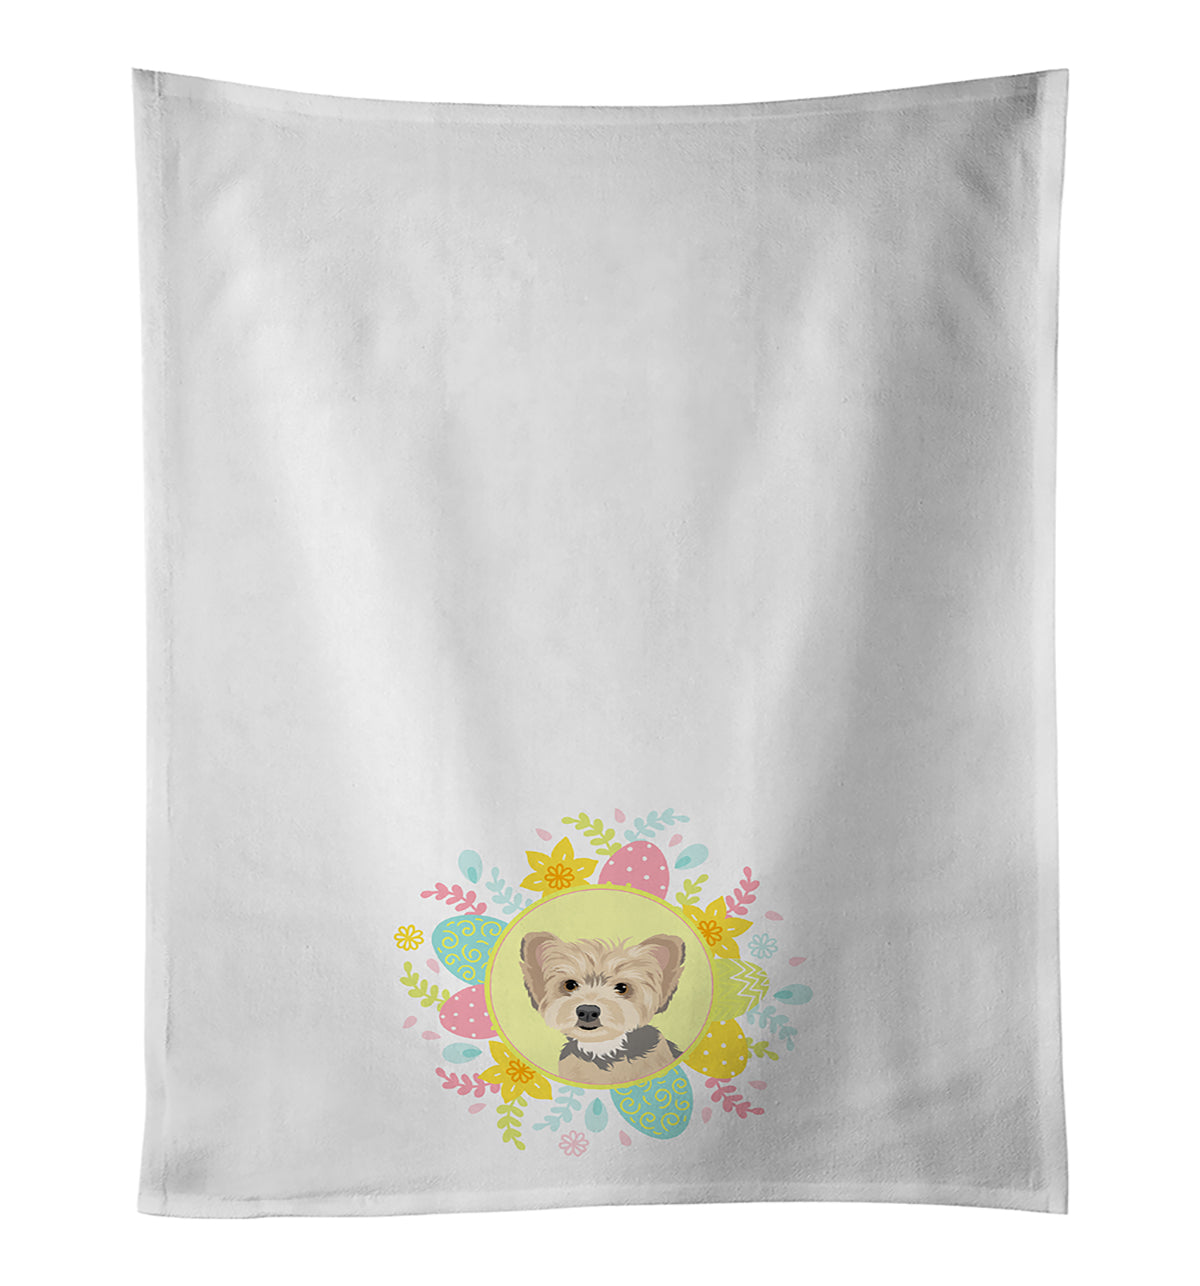 Buy this Yorkie Blue and Tan Puppy Easter White Kitchen Towel Set of 2